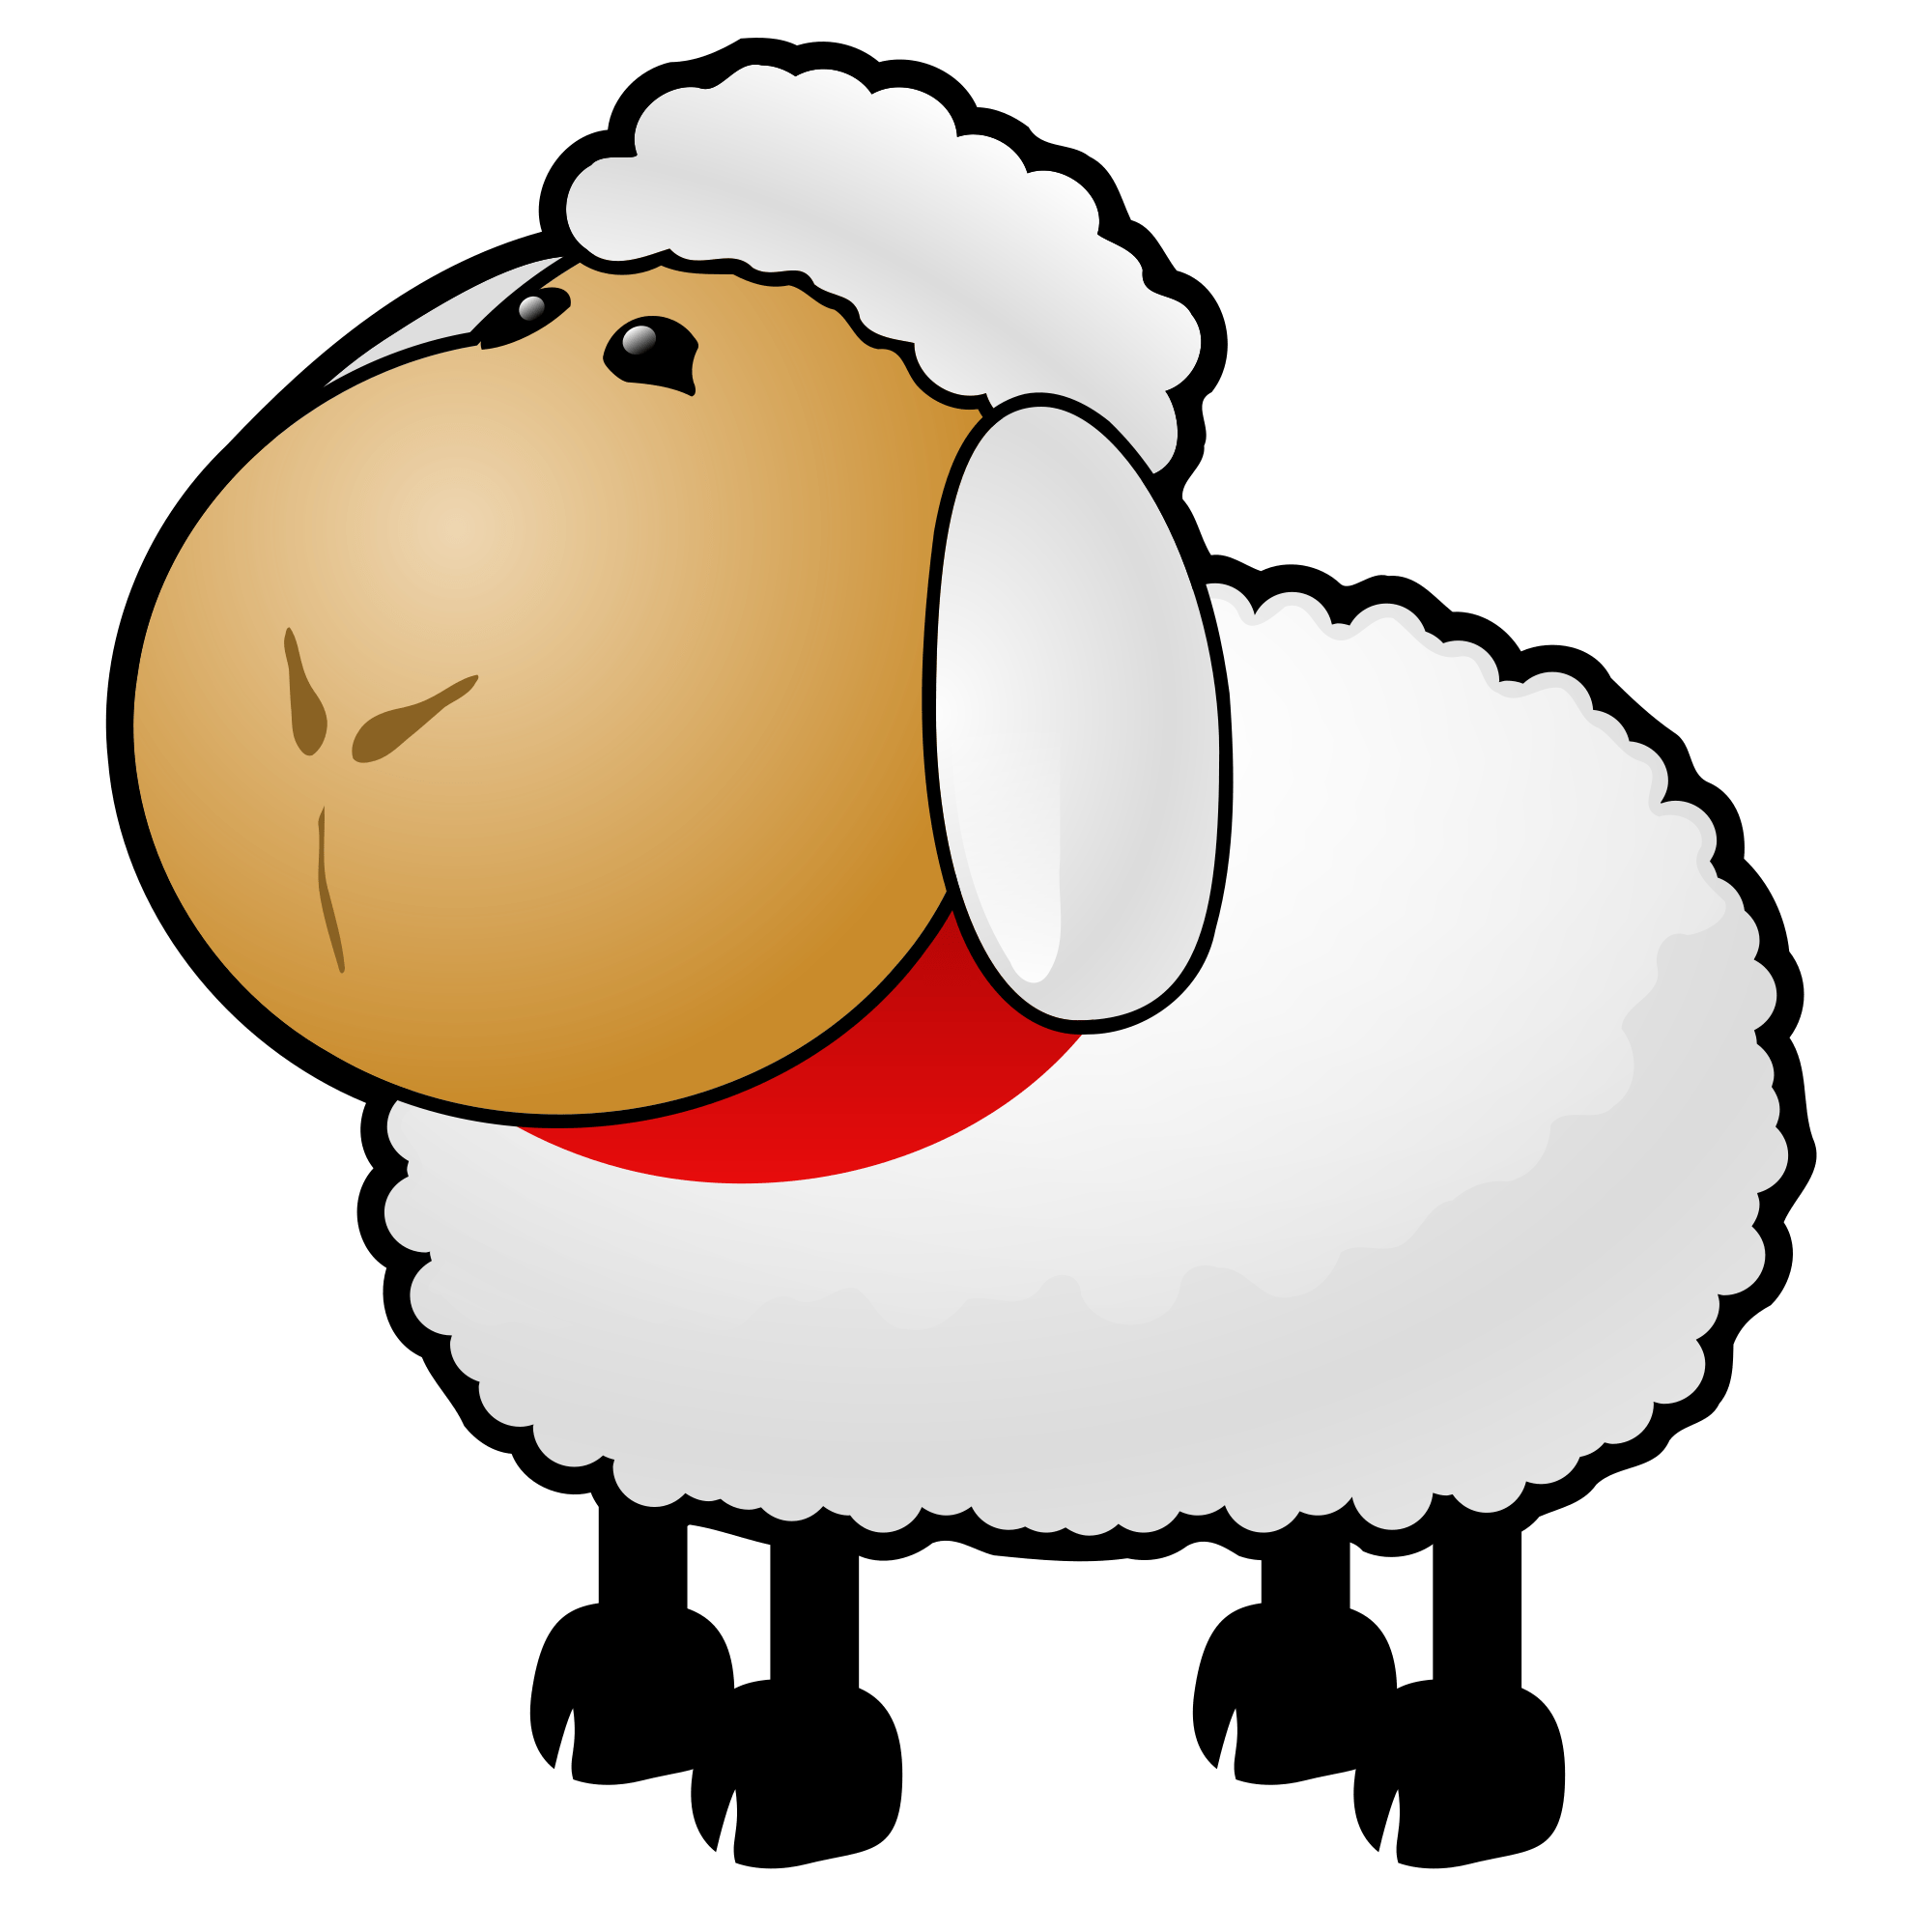 sheep-on-transparent-background-gameznet-29.png